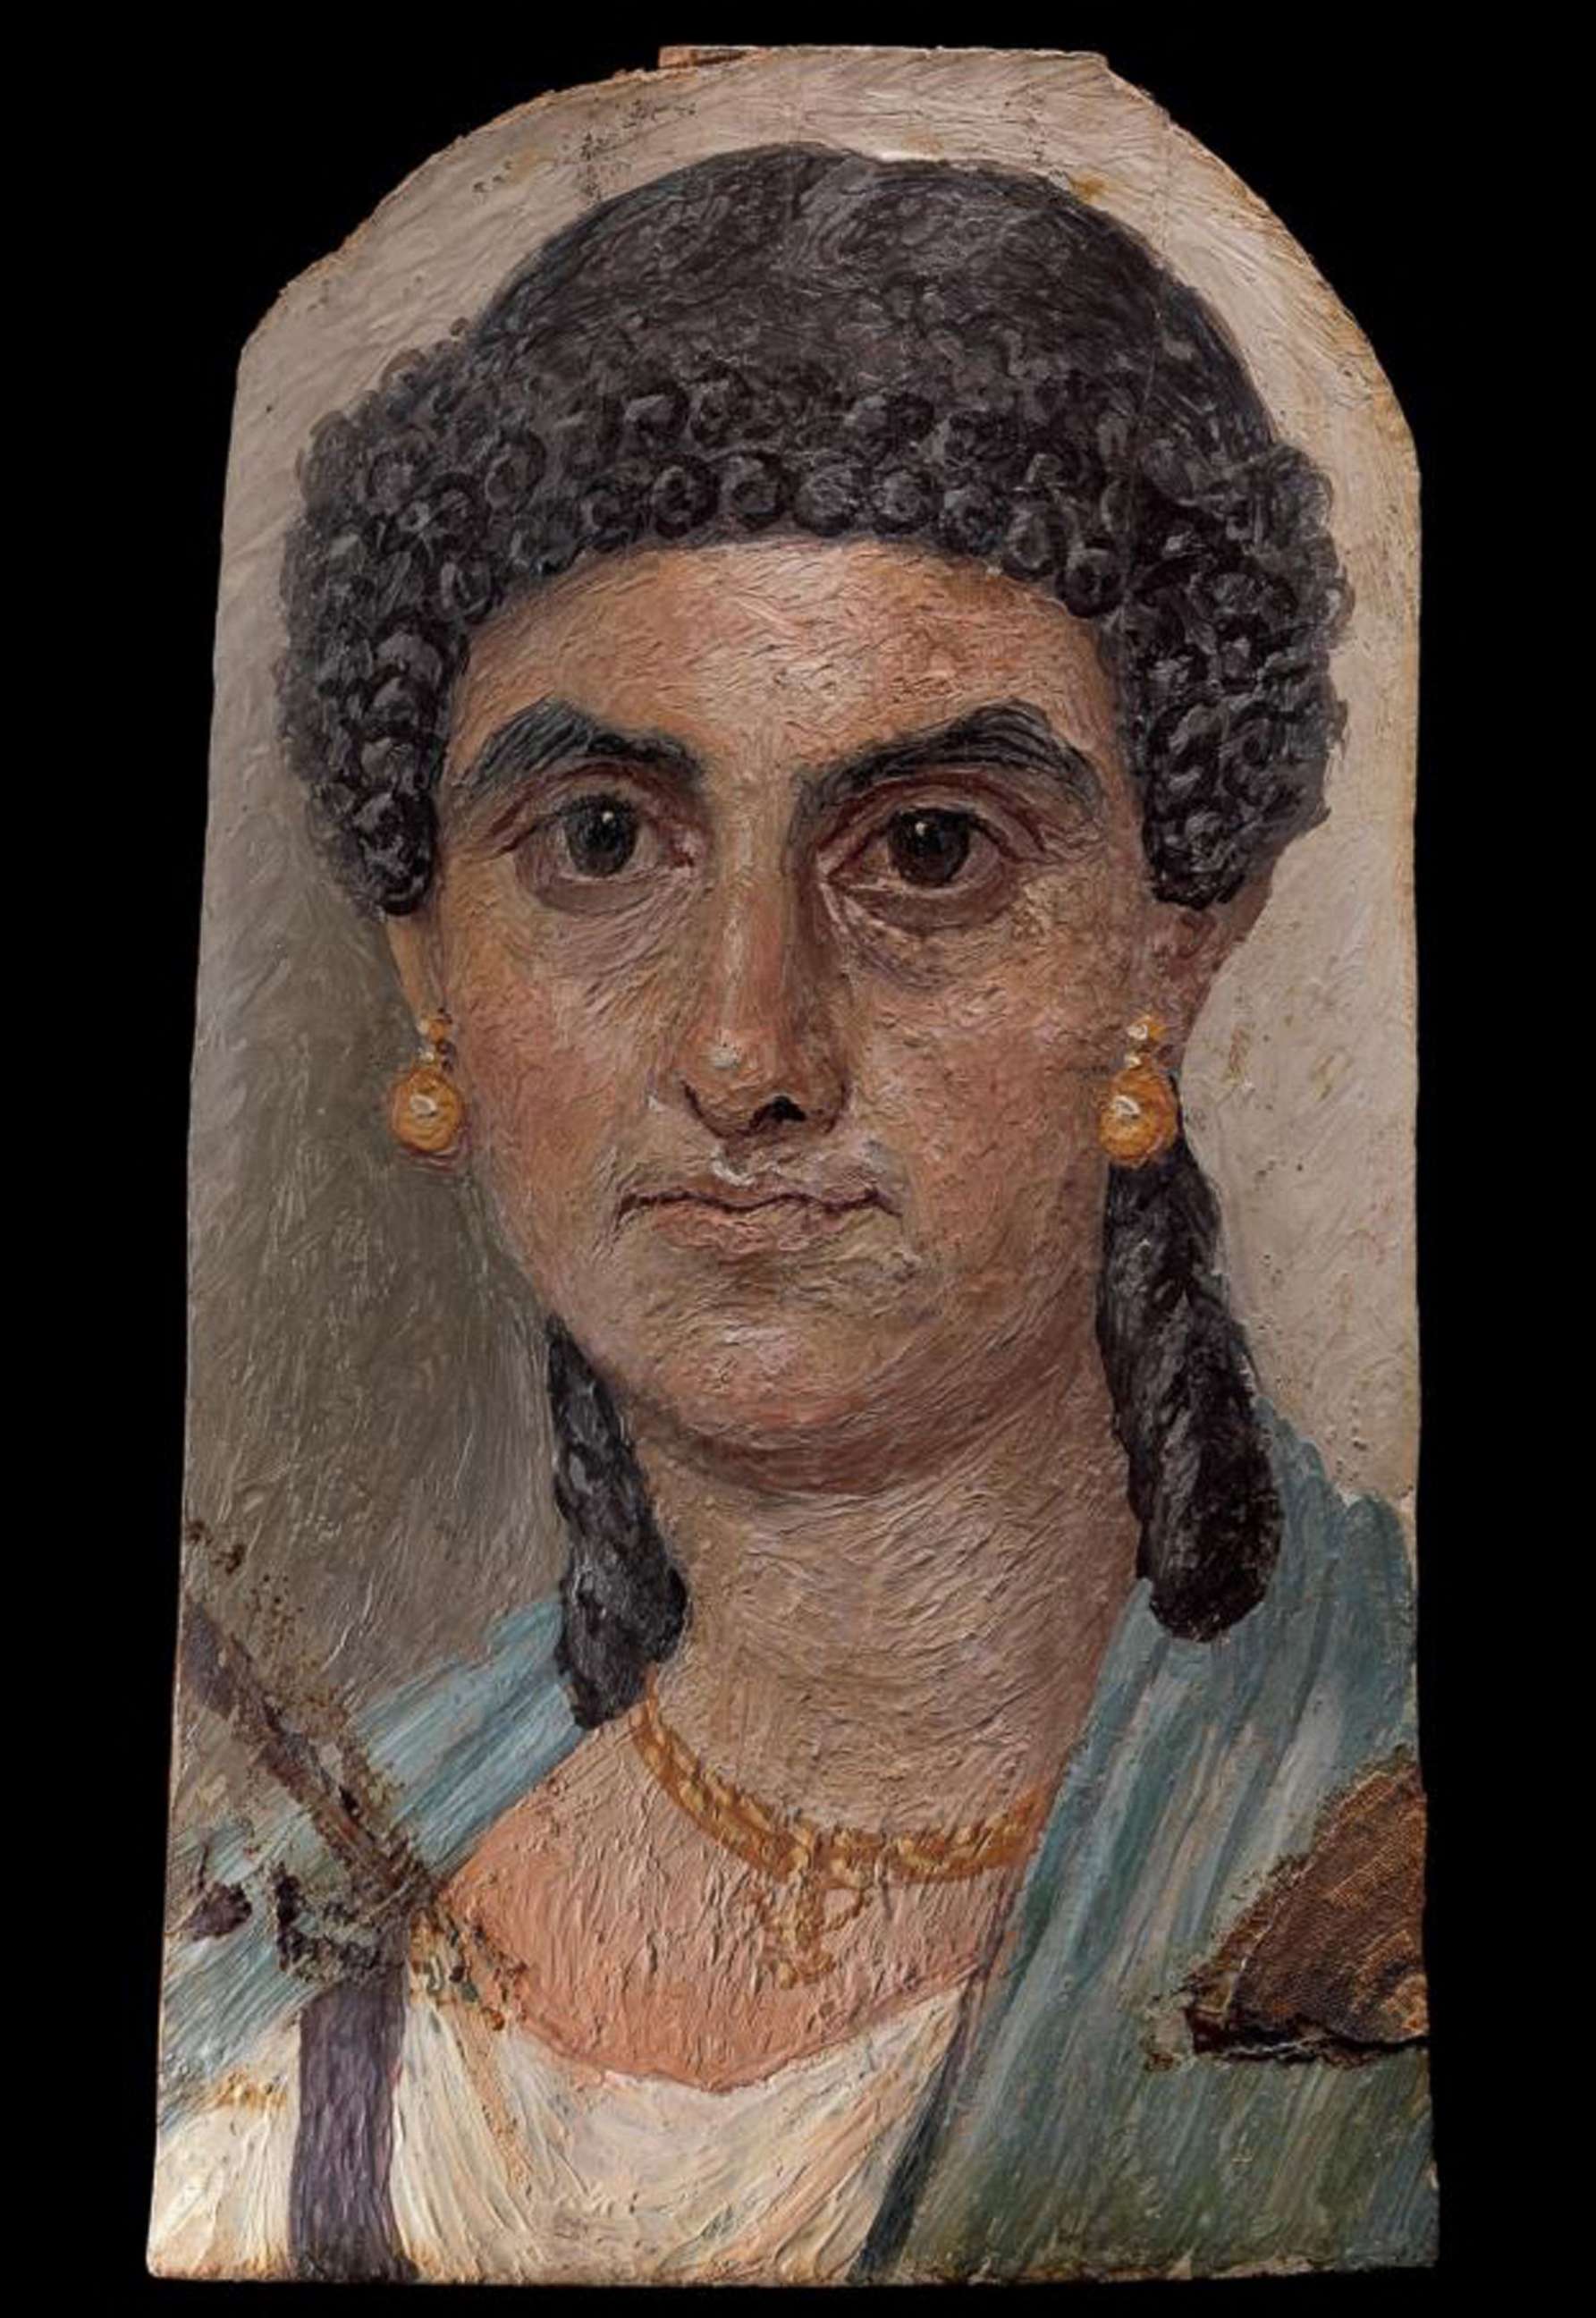 PHOTO: A painted portrait of a woman of the Fayum type, dated AD 54-68, valued at approximately $1,245,350.